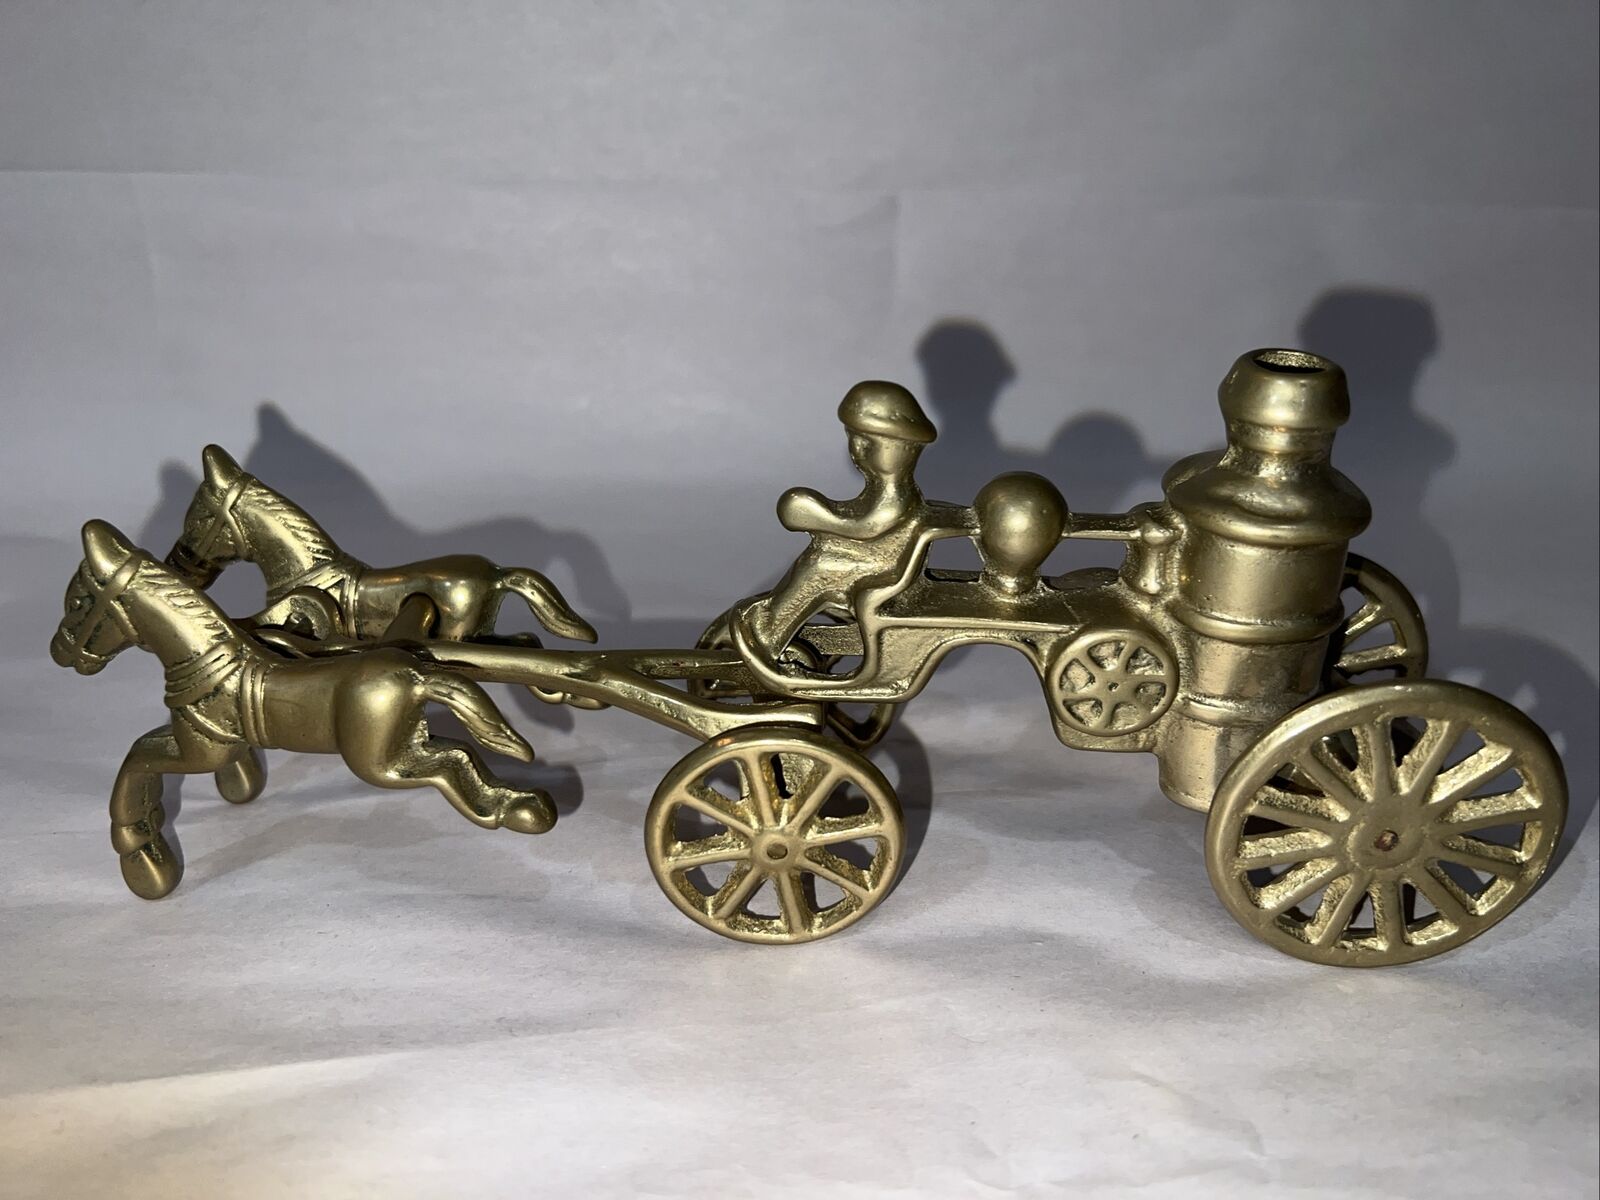 Small Brass Water Pump Wagon With Fireman Being Drawn By A Pair Of Horses VTG